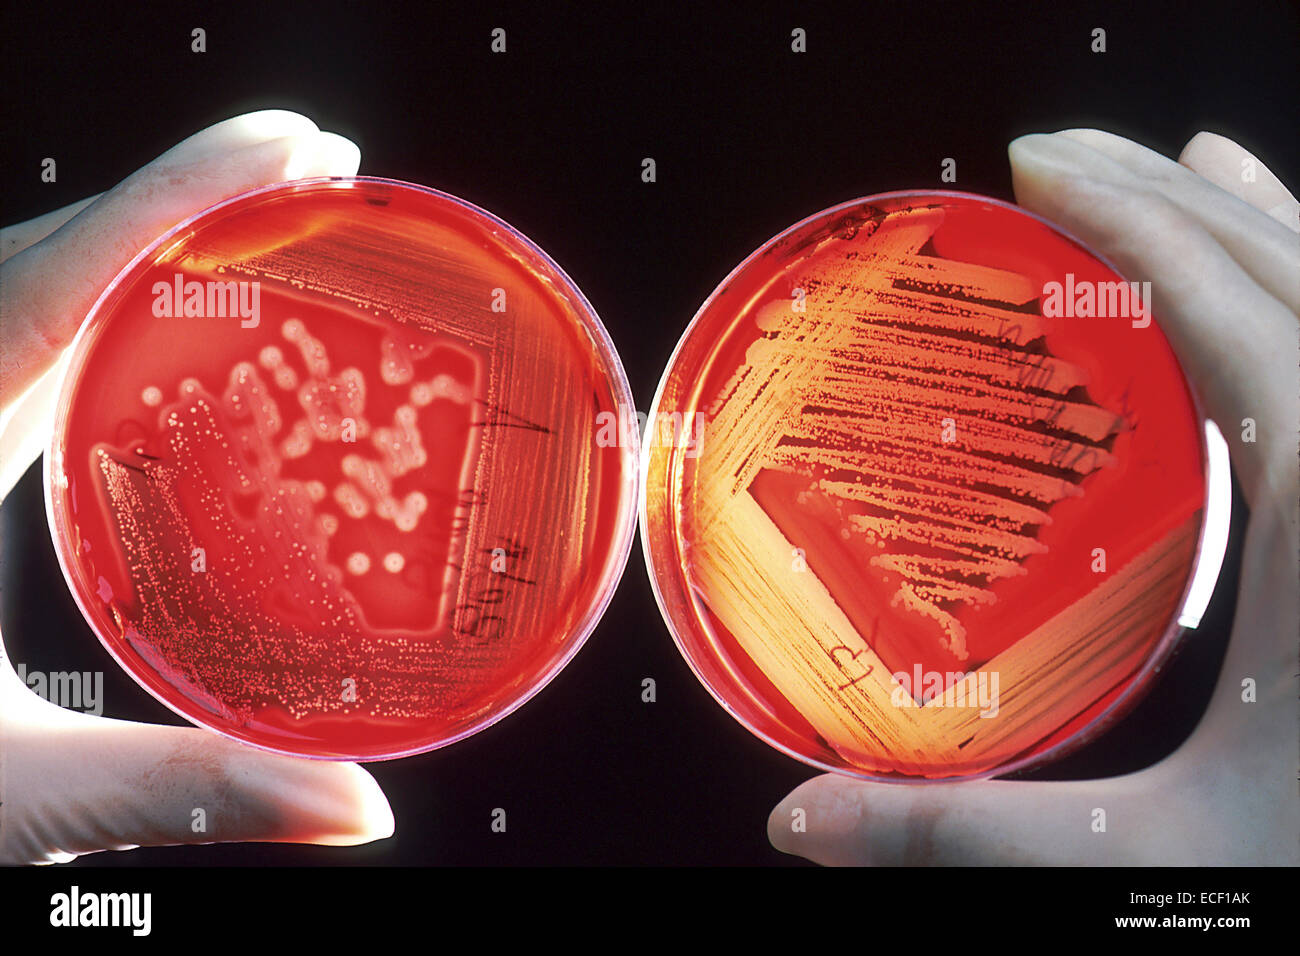 Red blood cells on an agar plate are used to diagnose infection. The plate on the left shows a positive staphyloccus infection. Stock Photo